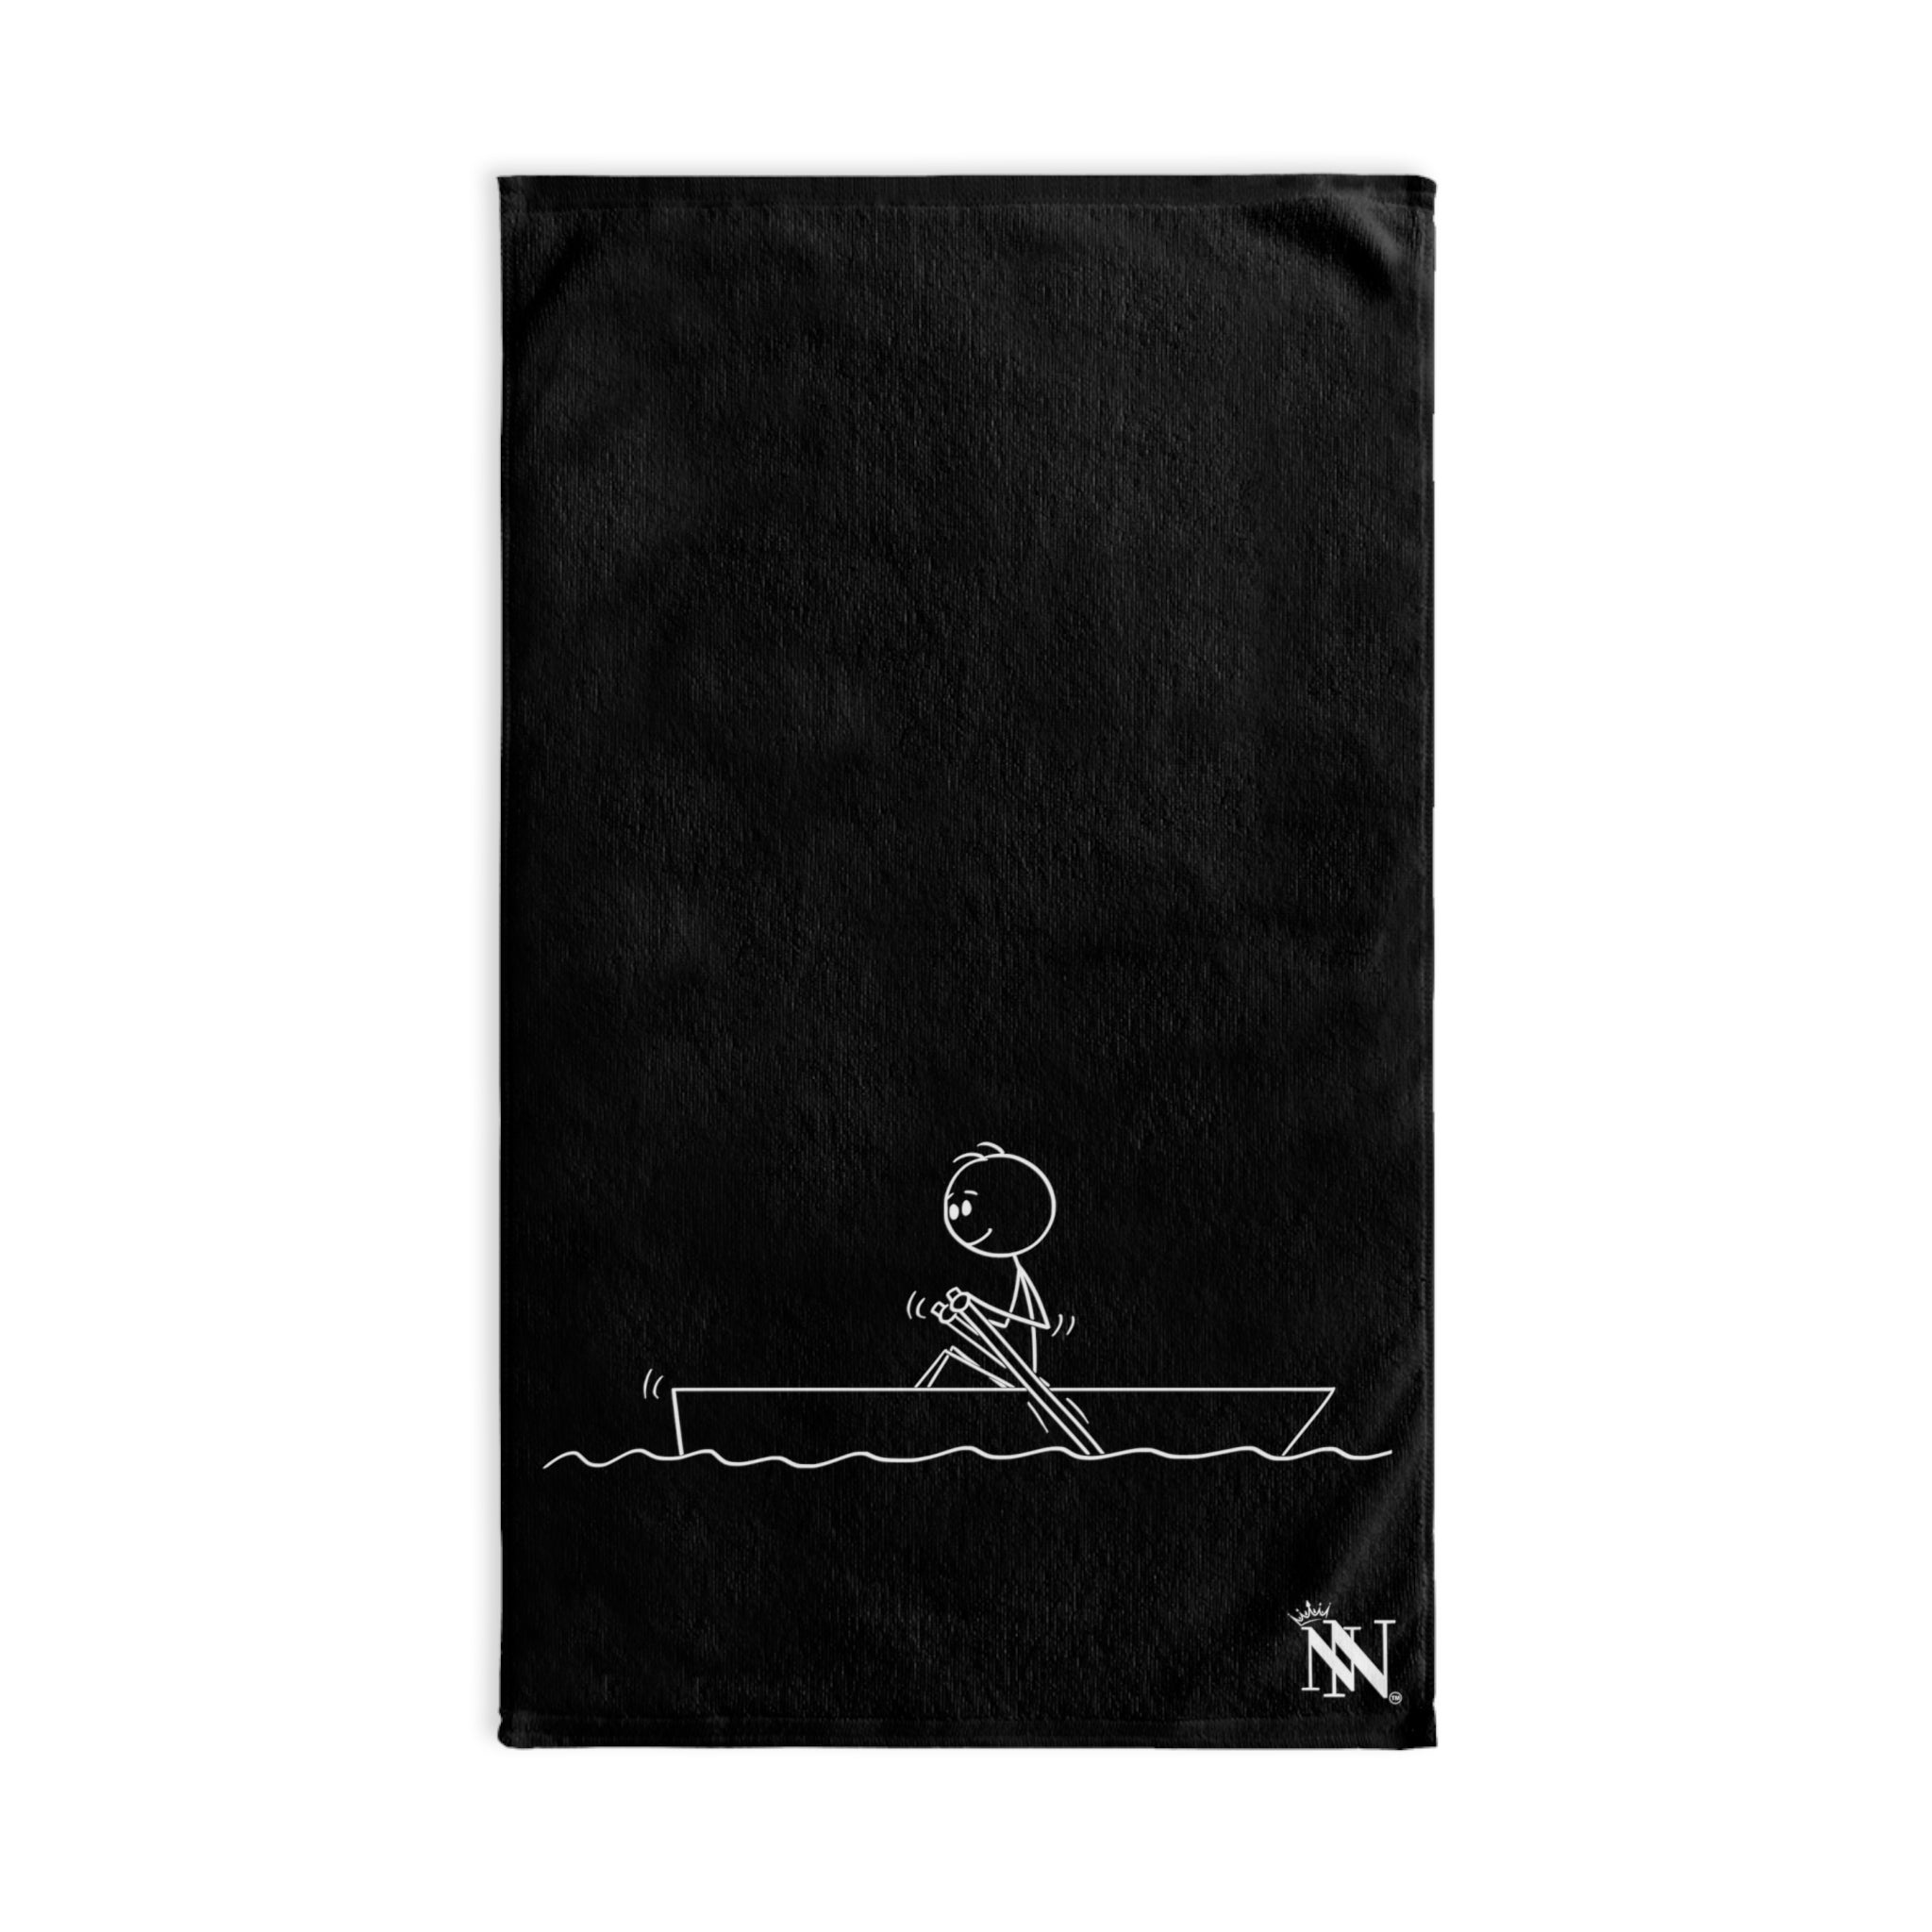 Man Stick in Boat Black | Sexy Gifts for Boyfriend, Funny Towel Romantic Gift for Wedding Couple Fiance First Year 2nd Anniversary Valentines, Party Gag Gifts, Joke Humor Cloth for Husband Men BF NECTAR NAPKINS